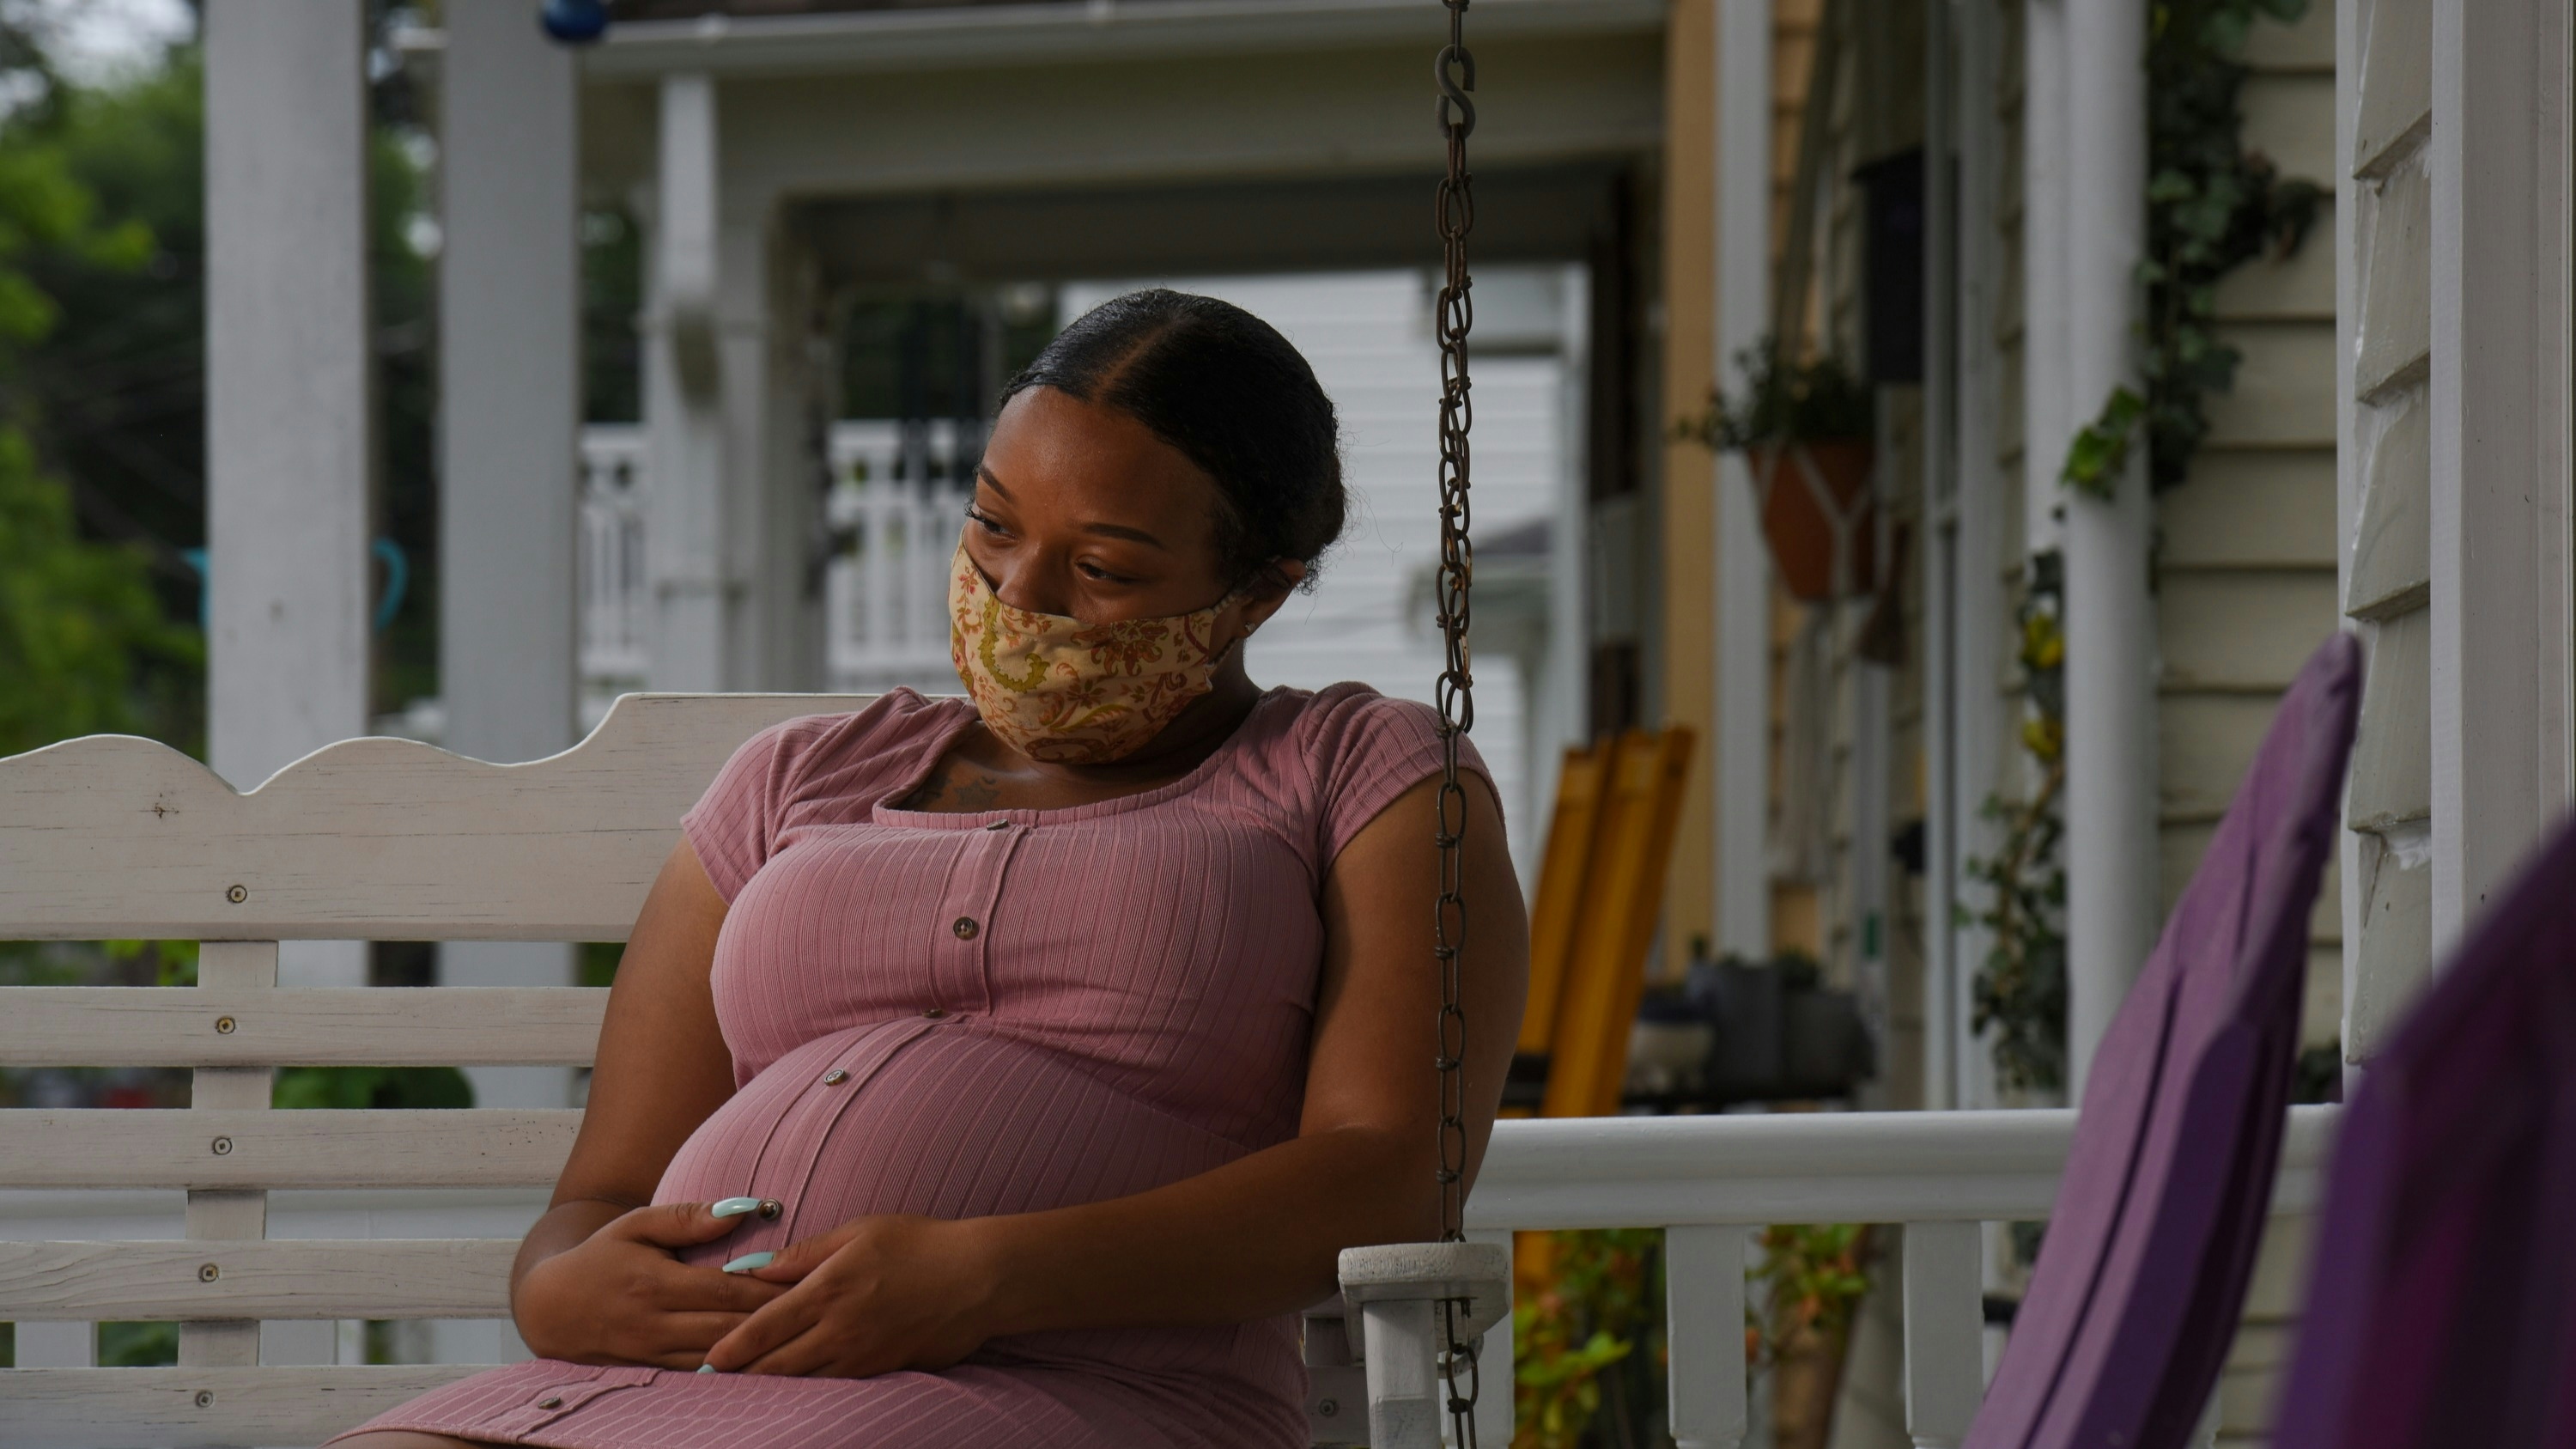 Kelsey Powell, five months pregnant, sits for a portrait at a home provided by Mary's Shelter, a charity that offers housing for expectant mothers in Fredericksburg, VA, on Wednesday, June 10, 2020. 